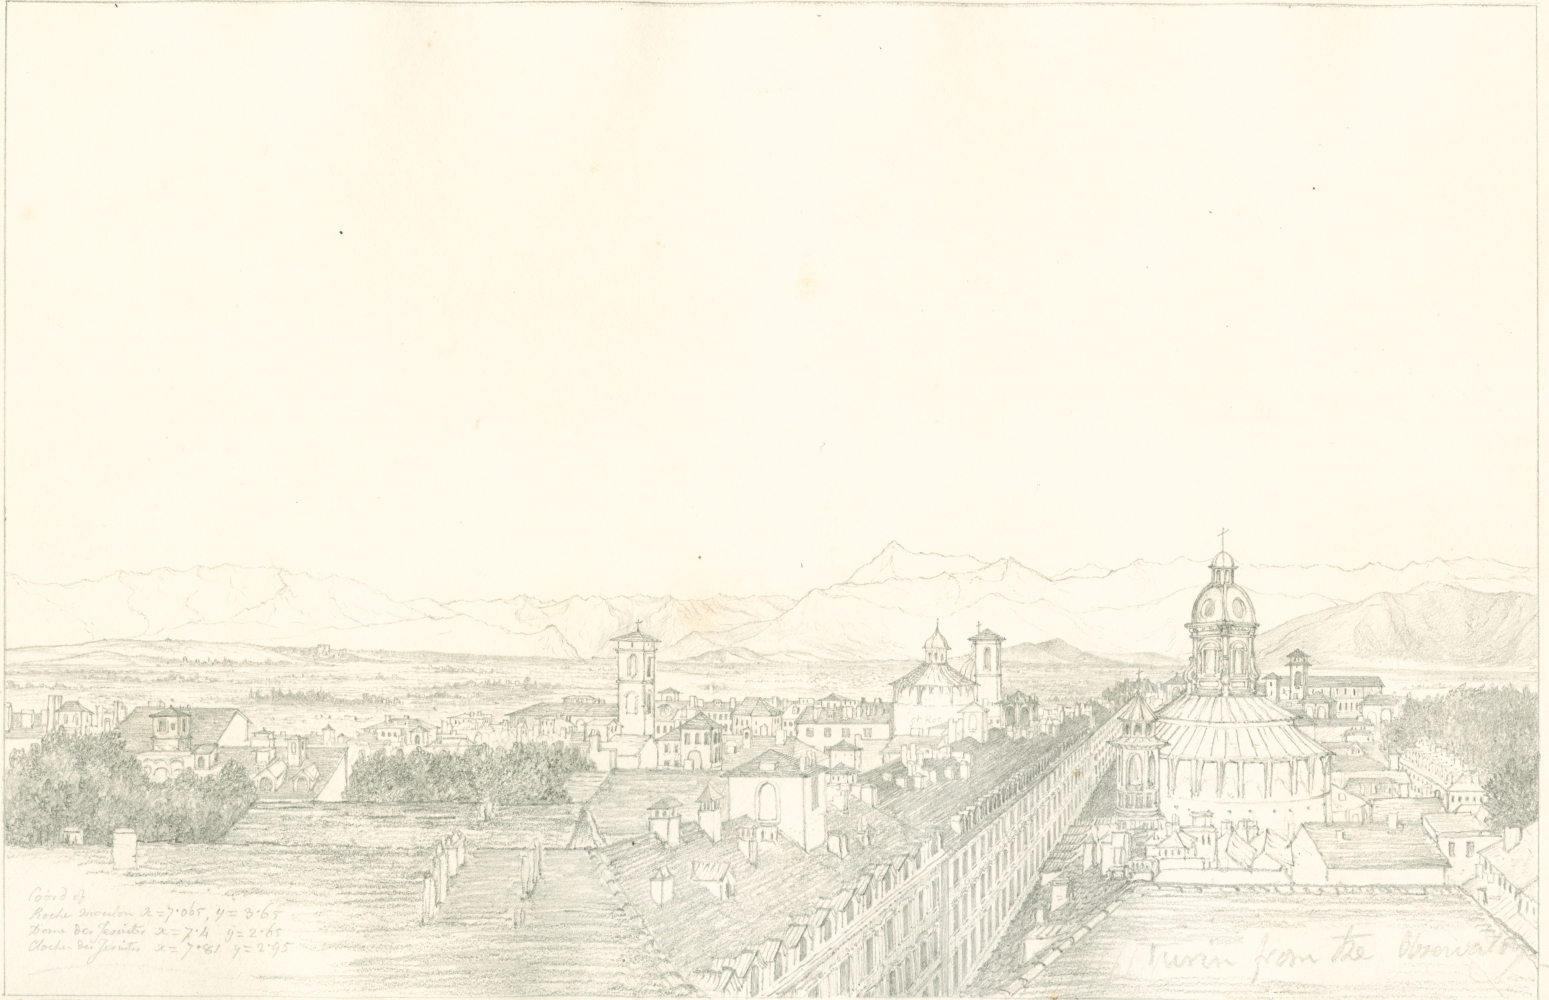 Sir John Frederick William HERSCHEL (English, 1792-1872) "No 351 Turin with the chain of the Alps. From the roof of the Observatory”, 1824 Camera lucida drawing, pencil on paper